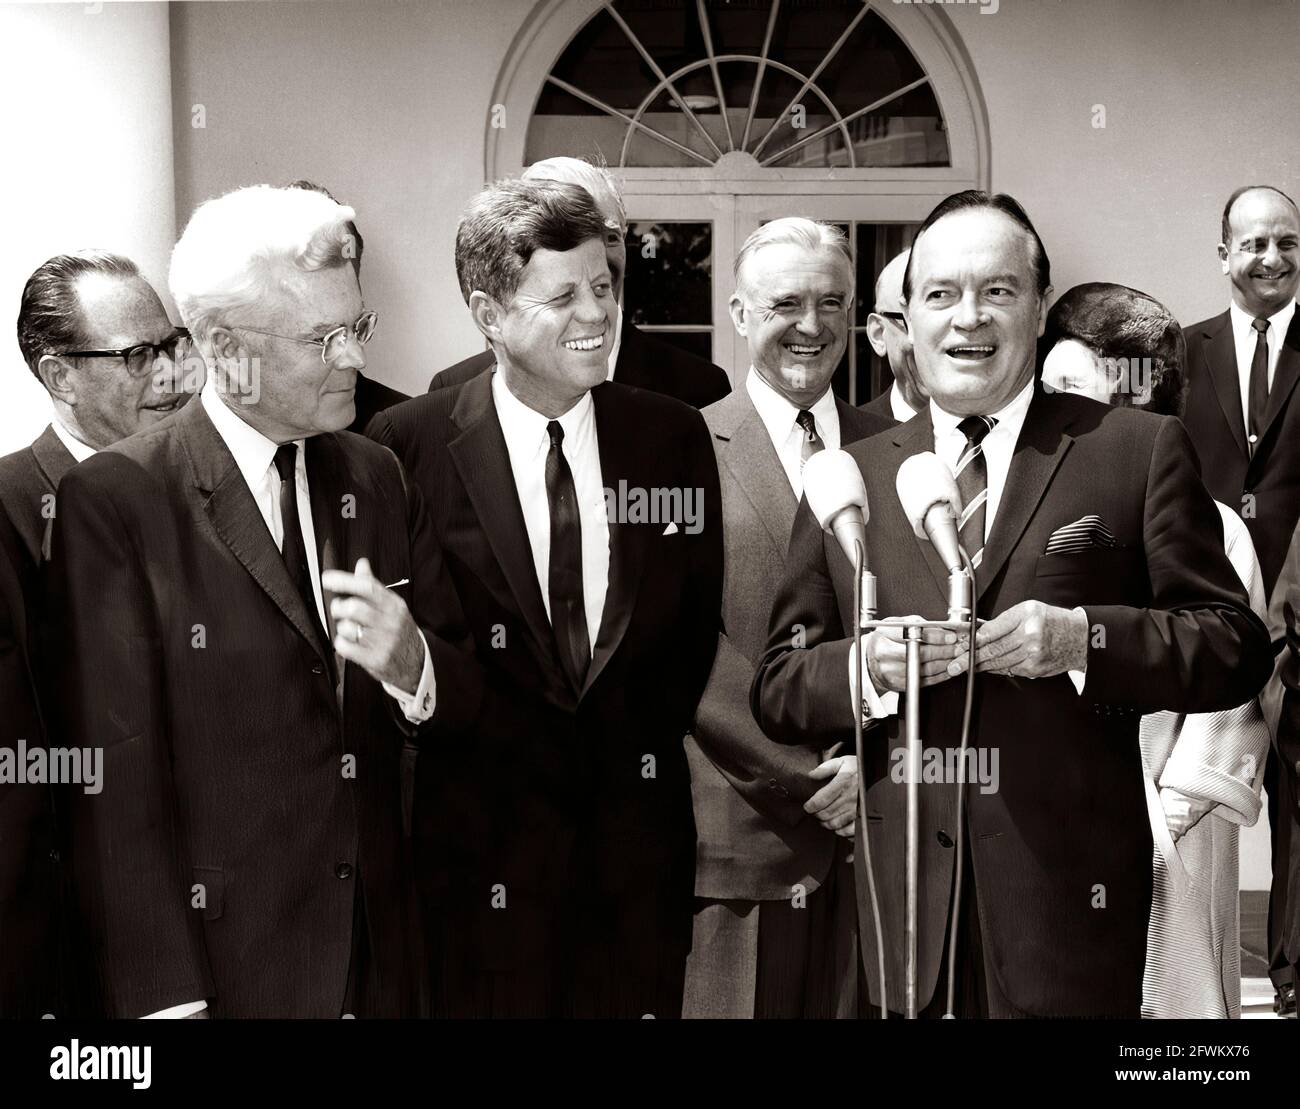 President John F. Kennedy laughs as actor and comedian, Bob Hope, delivers remarks after receiving the Congressional Gold Medal, presented by President Kennedy in recognition of his services to the country as an entertainer during World War II. Left to right: Senator Thomas H. Kuchel (California); Representative Michael A. Feighan (Ohio); President Kennedy; Senator Stuart Symington (Missouri); Mr. Hope; Dolores Hope (mostly hidden), wife of Mr. Hope; unidentified man. Rose Garden, White House, Washington, D.C. Stock Photo